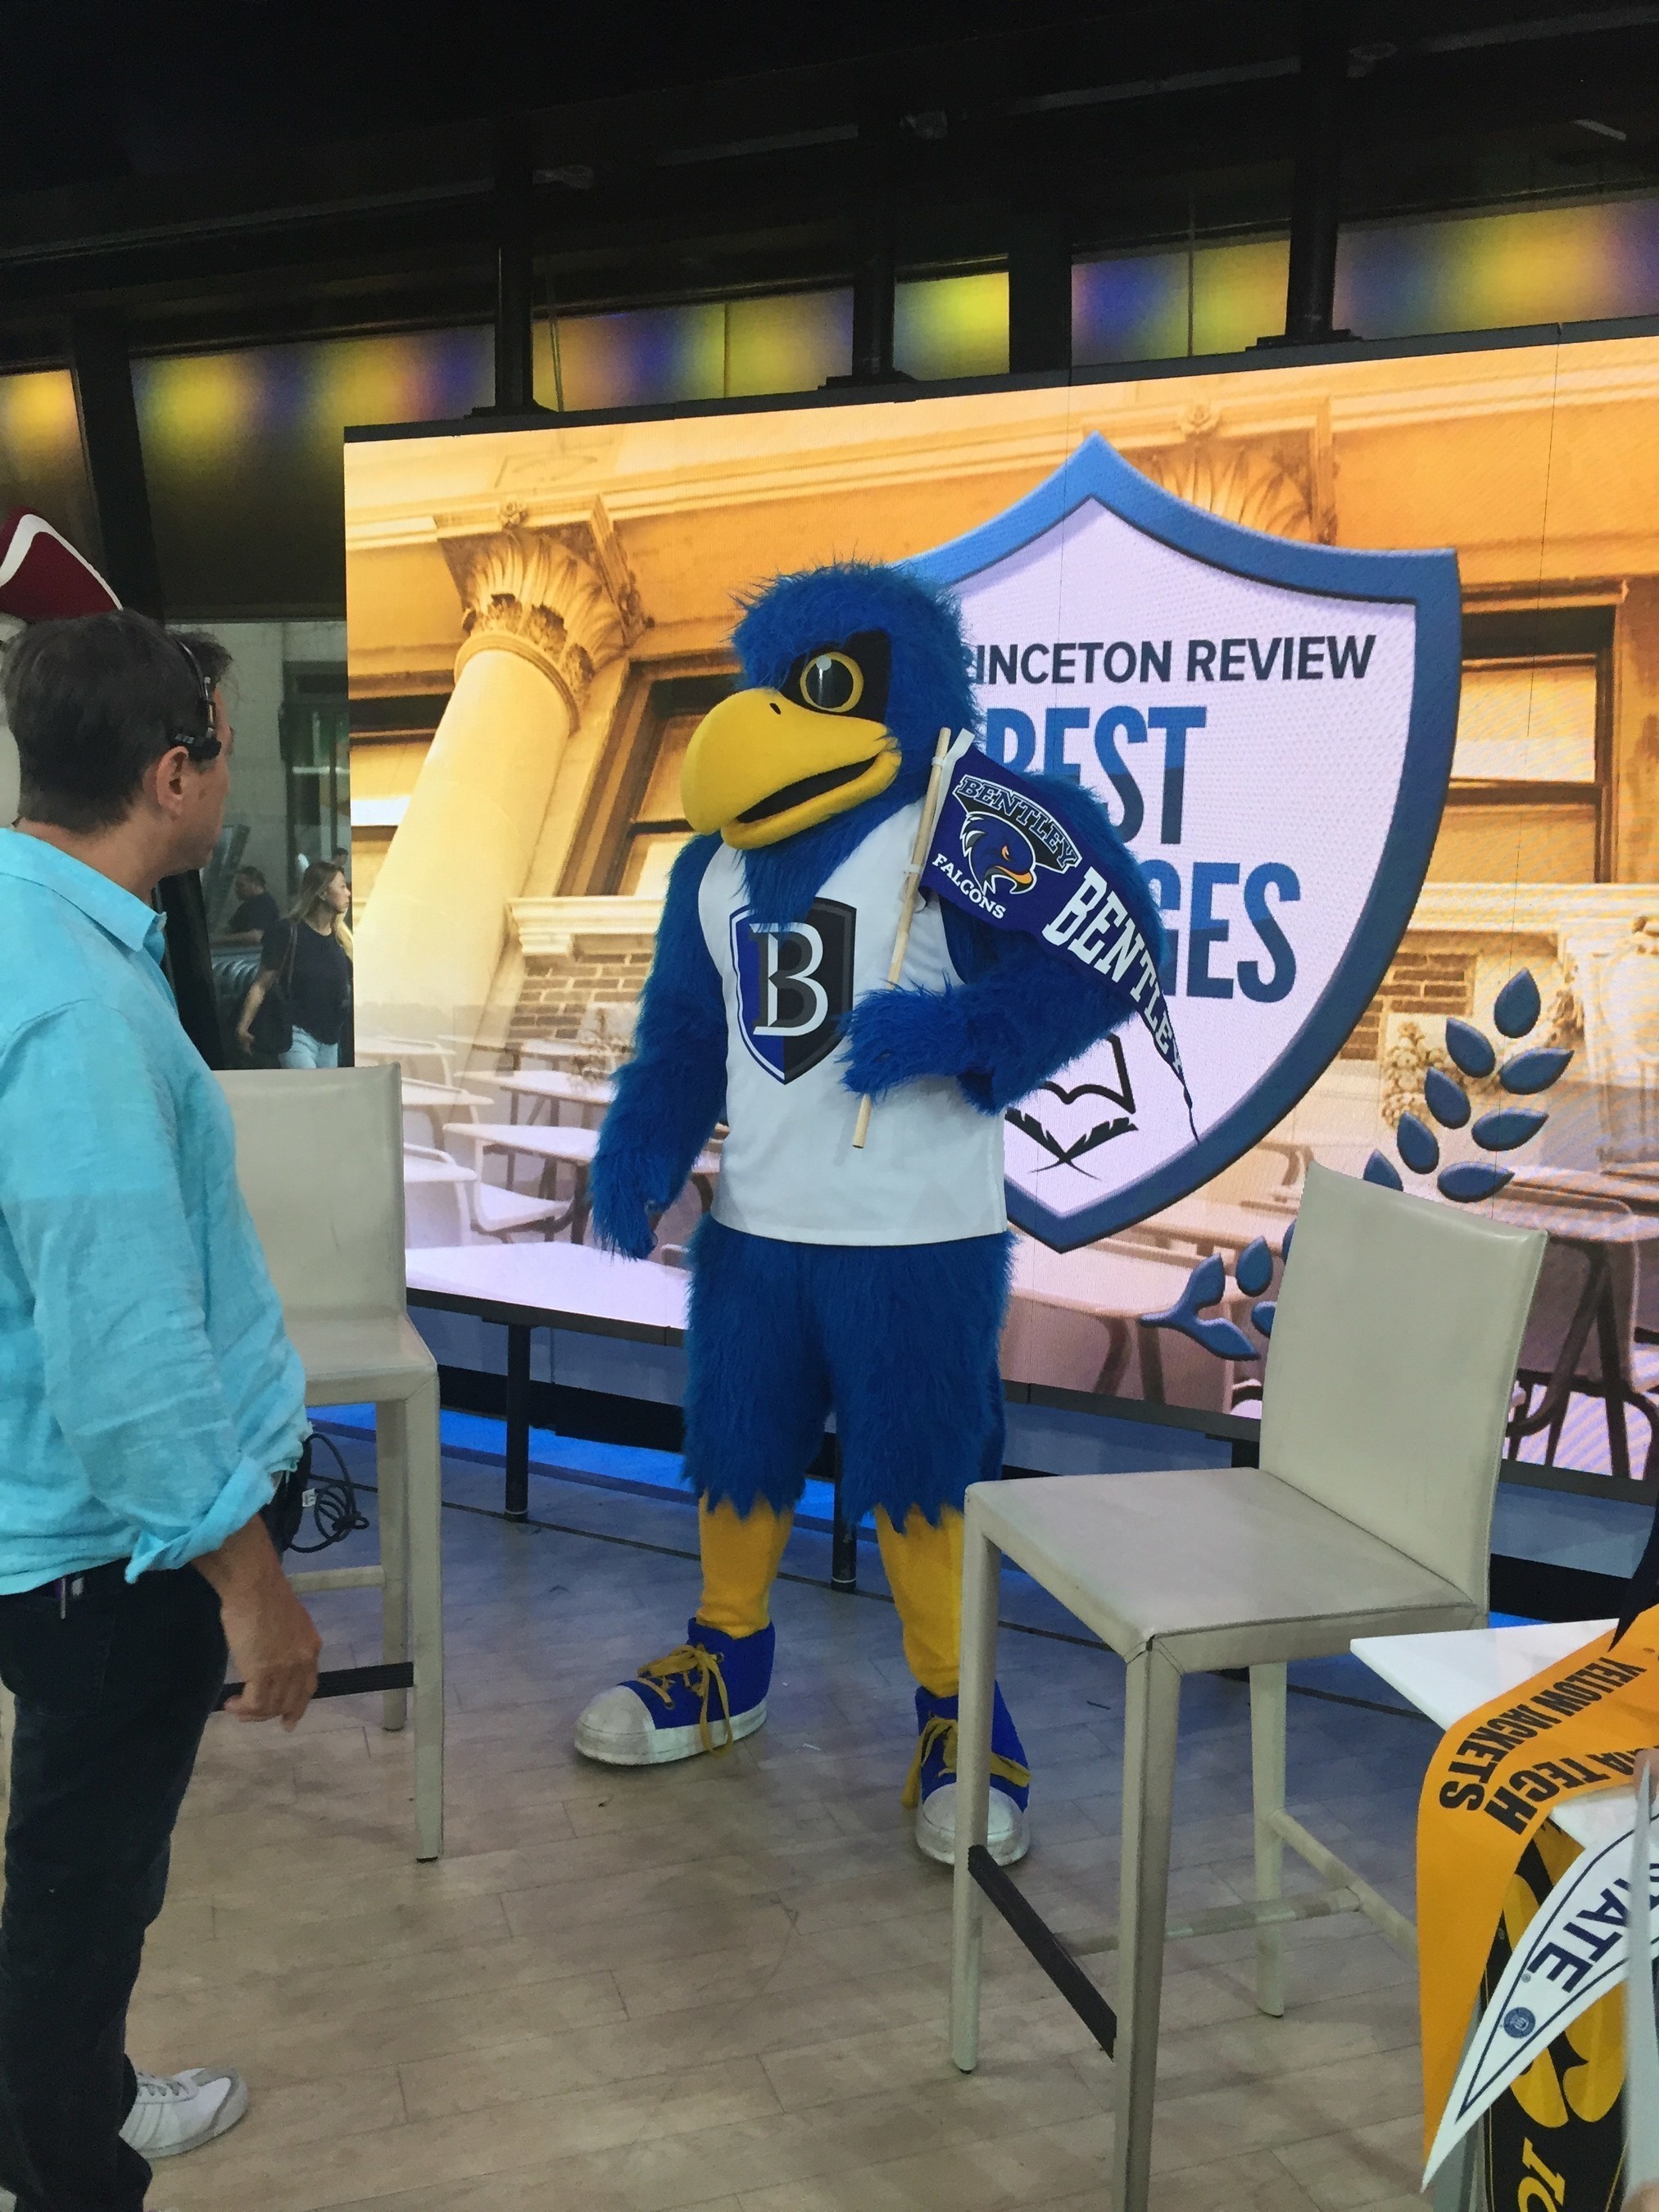 Bentley University mascot Flex appears on TODAY Show as Bentley Career Services ranked #1 in Princeton Review annual college guide.